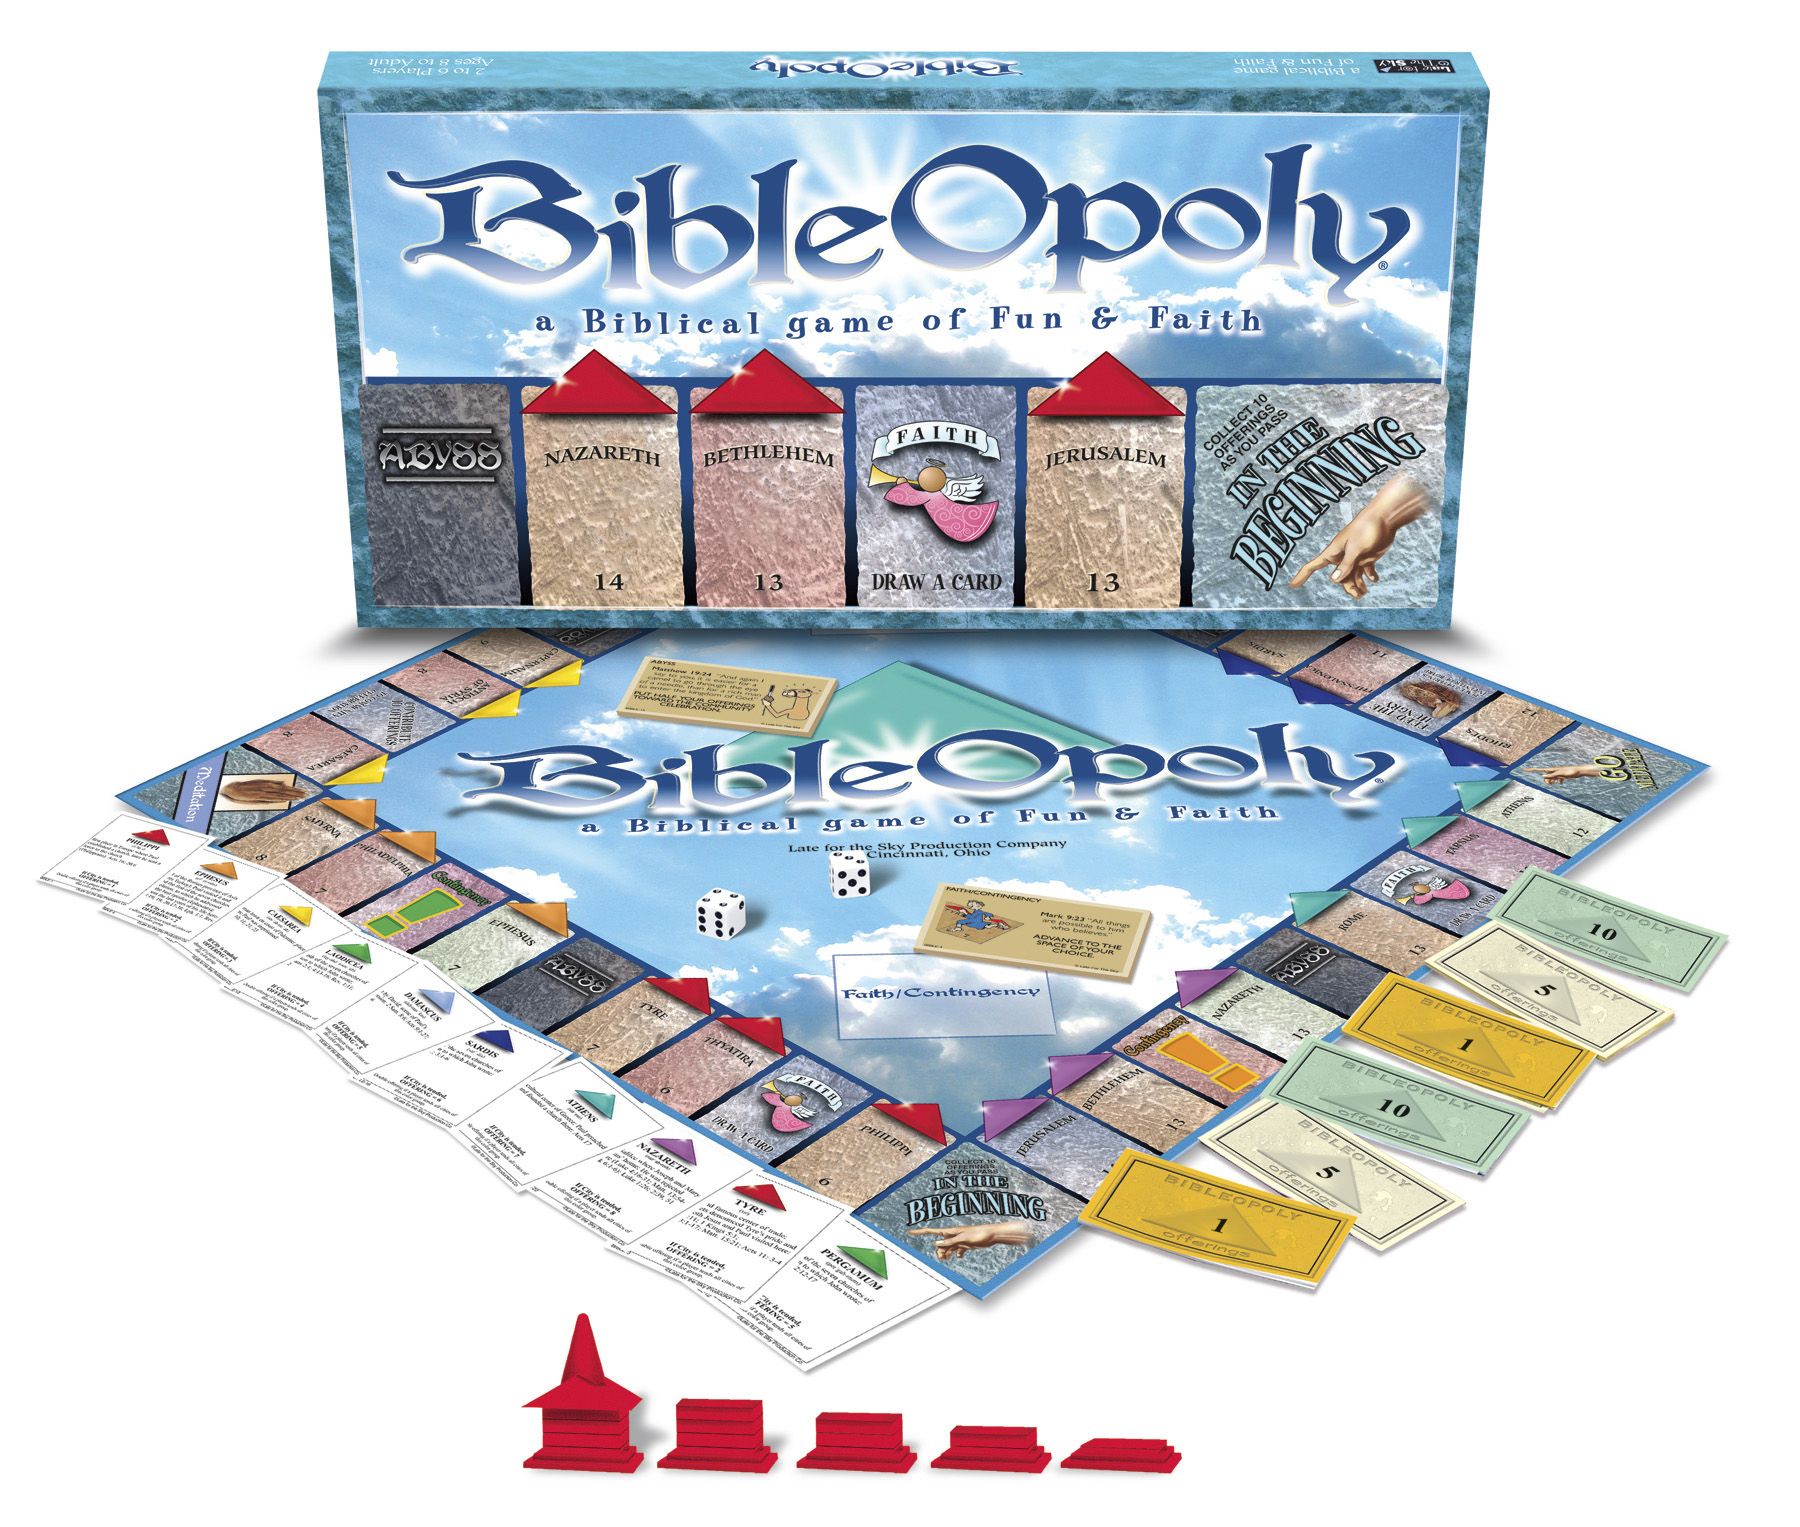 Late for the Sky Cat-Opoly Board Game 